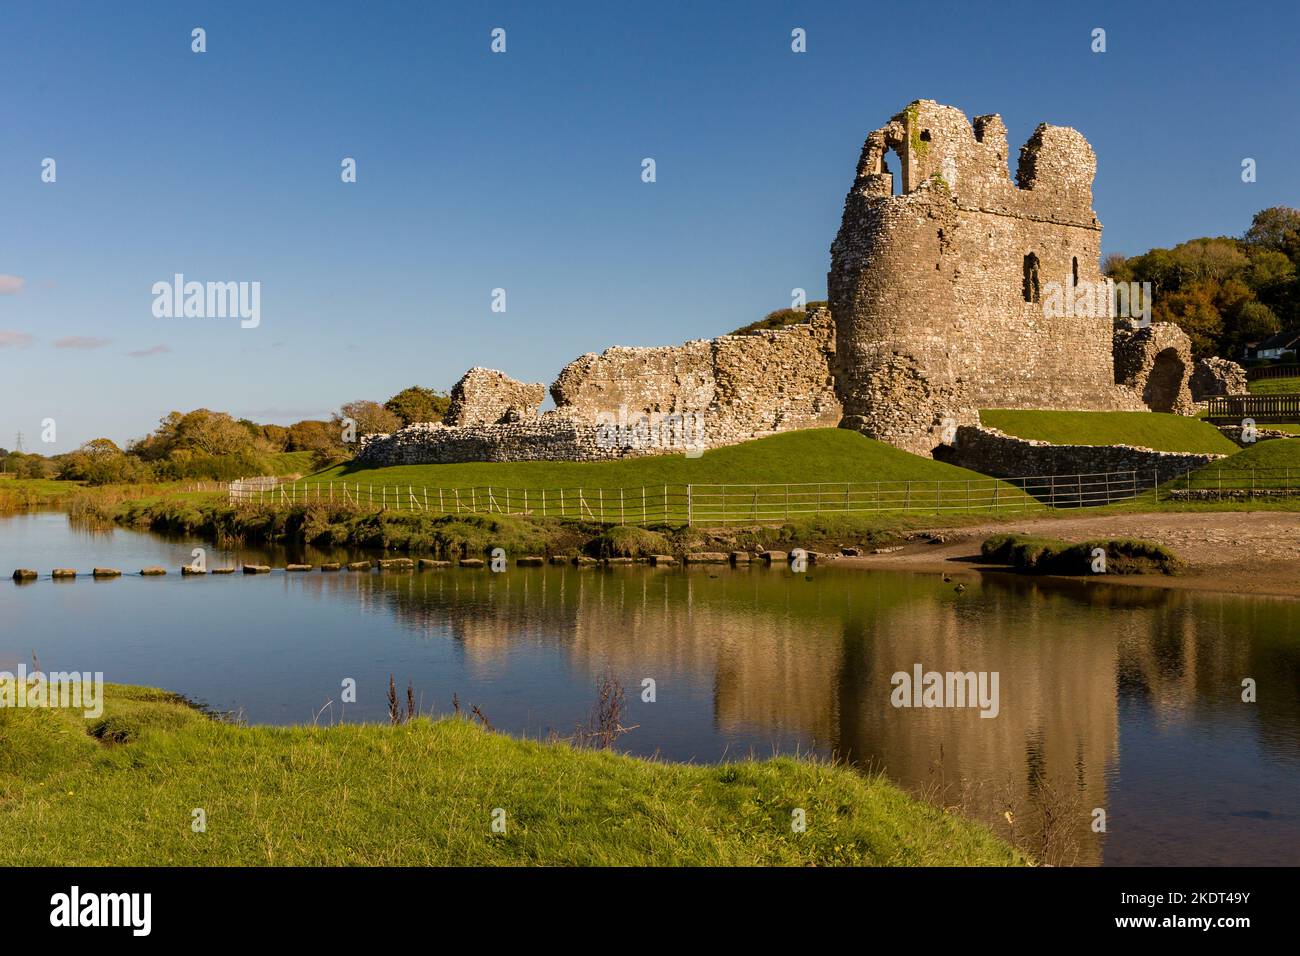 Ruins of a 12th century Welsh castle in the rural countryside (Ogmore Castle, Vale of Glamorgan) Stock Photo